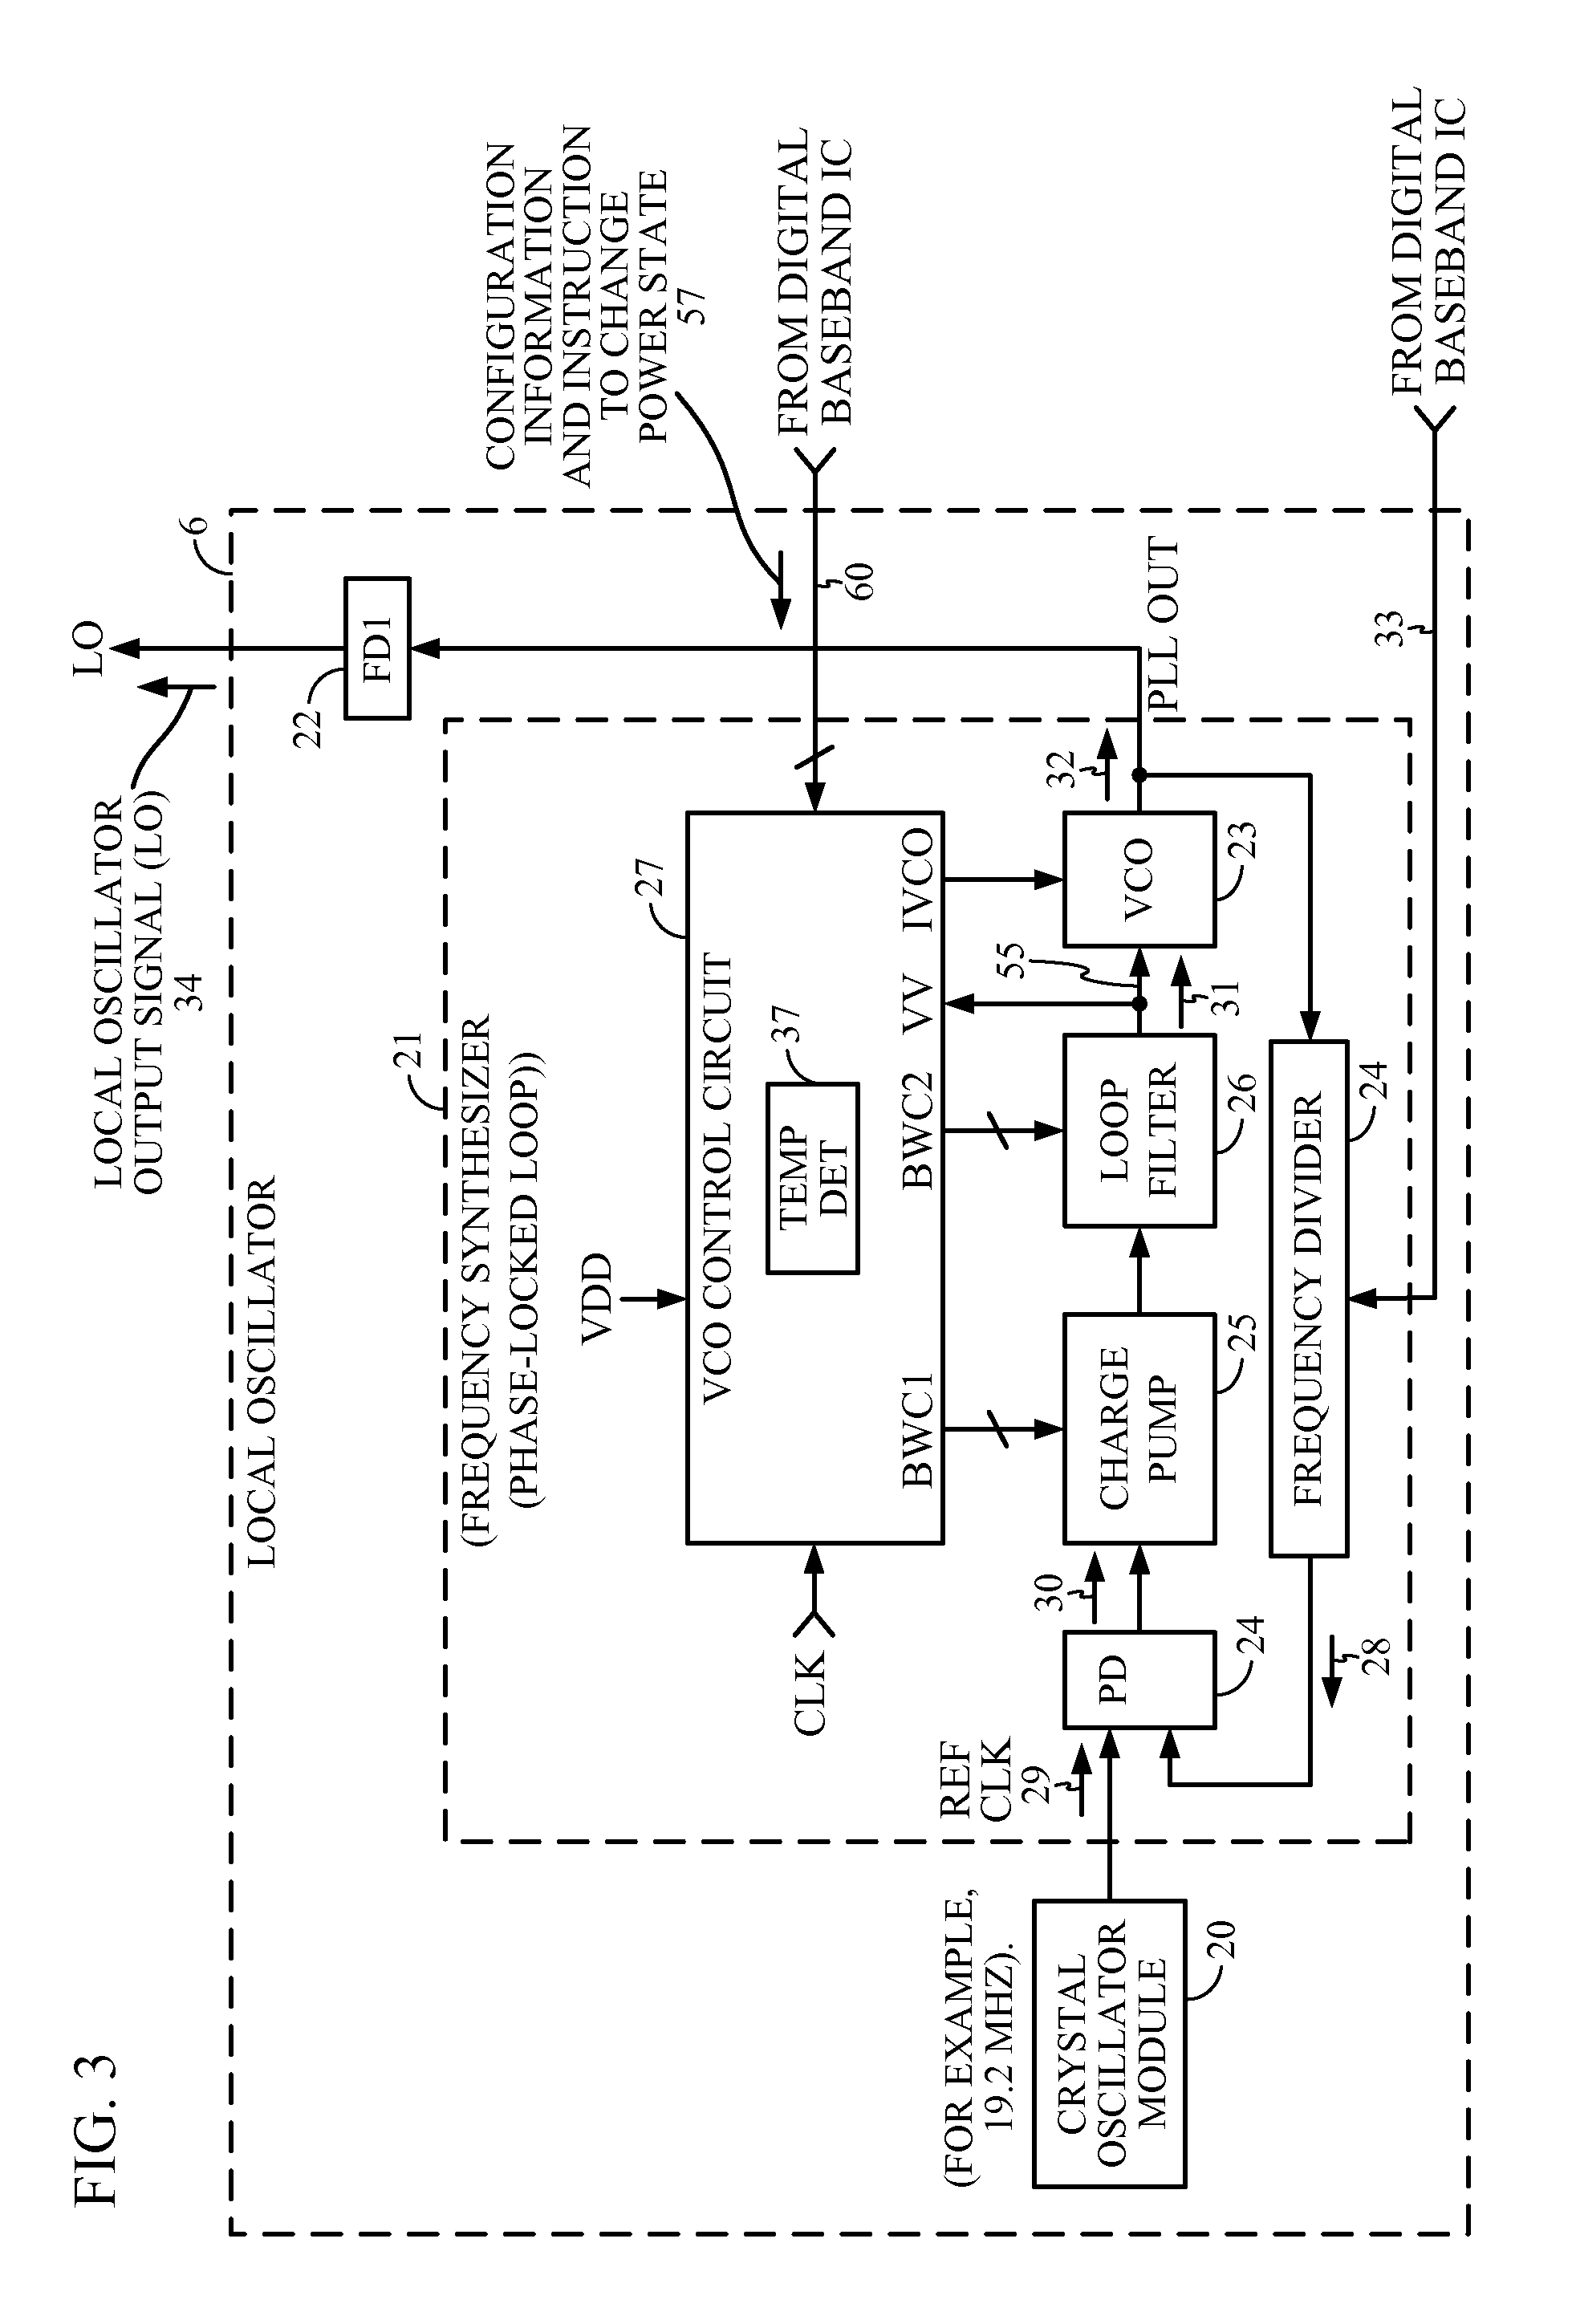 Dynamic biasing of a vco in a phase-locked loop